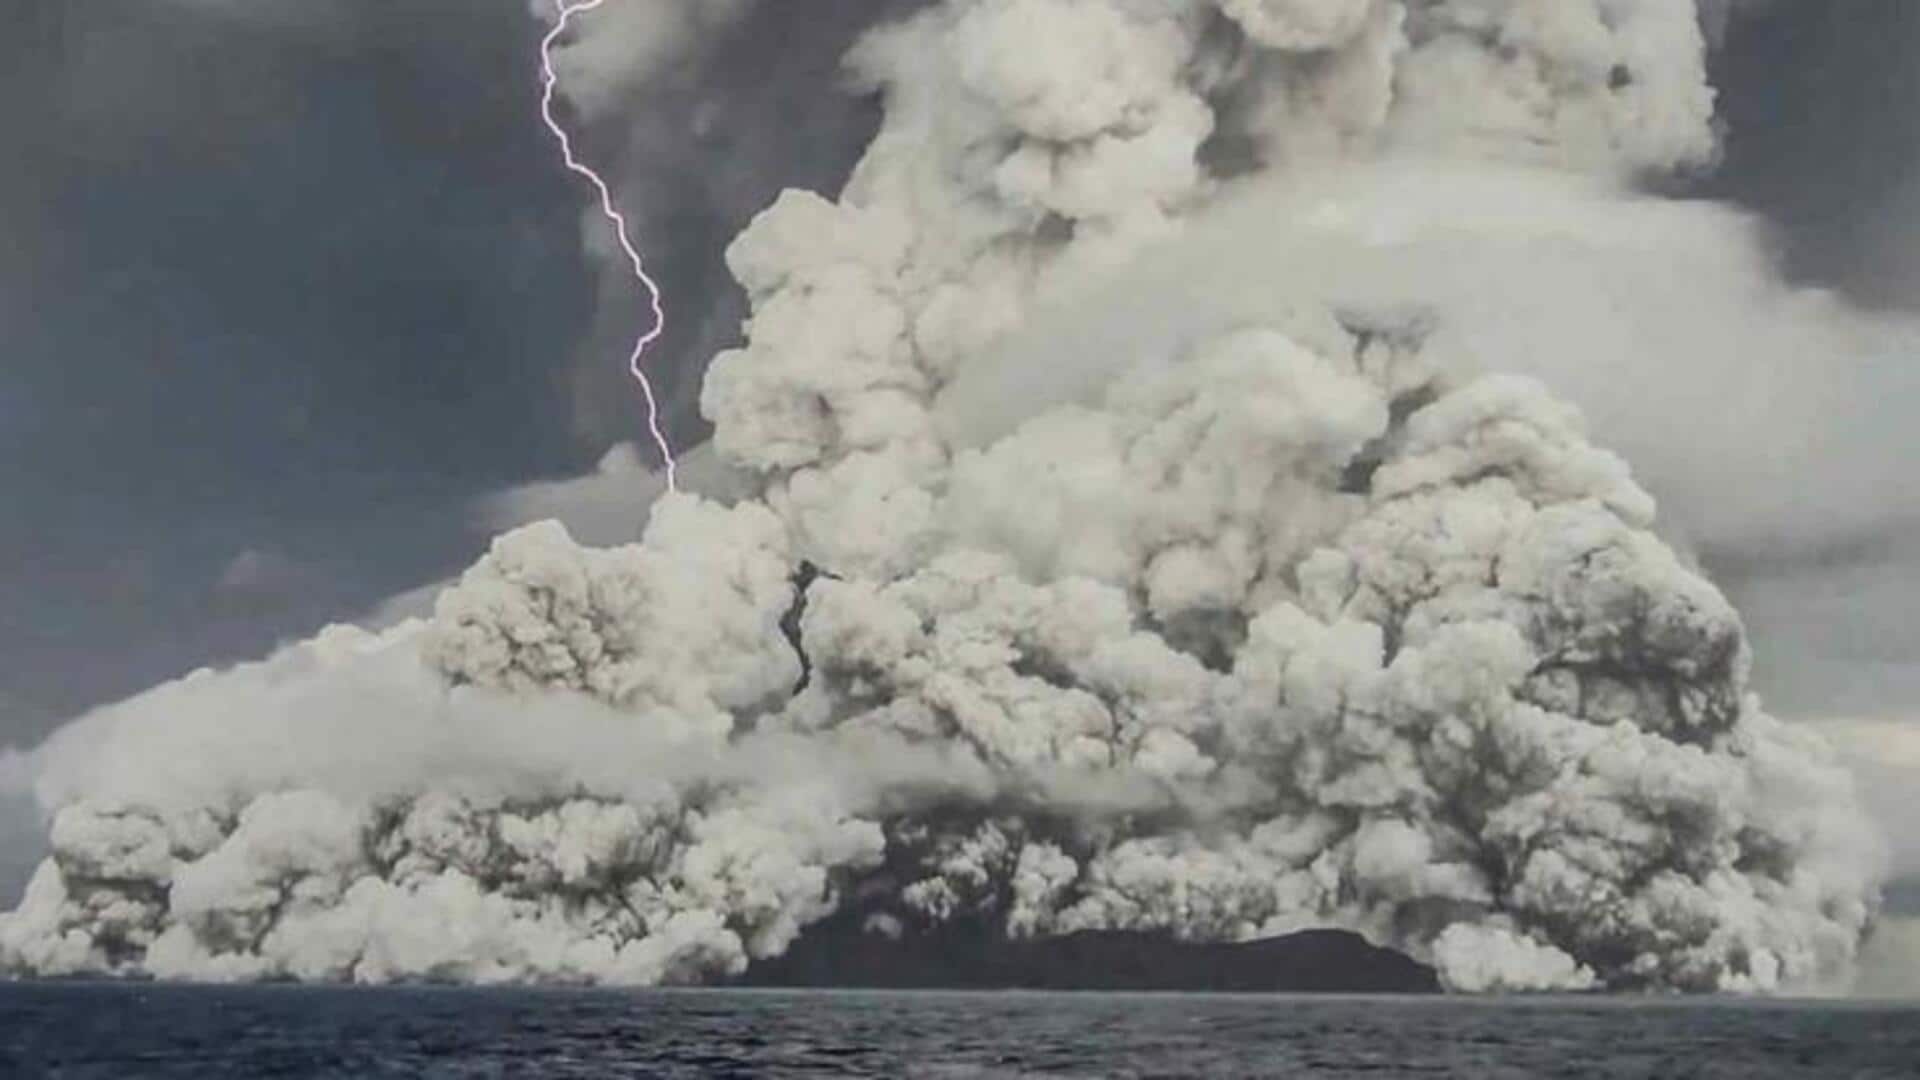 Tonga volcanic eruption unleashed fastest ocean flows ever documented